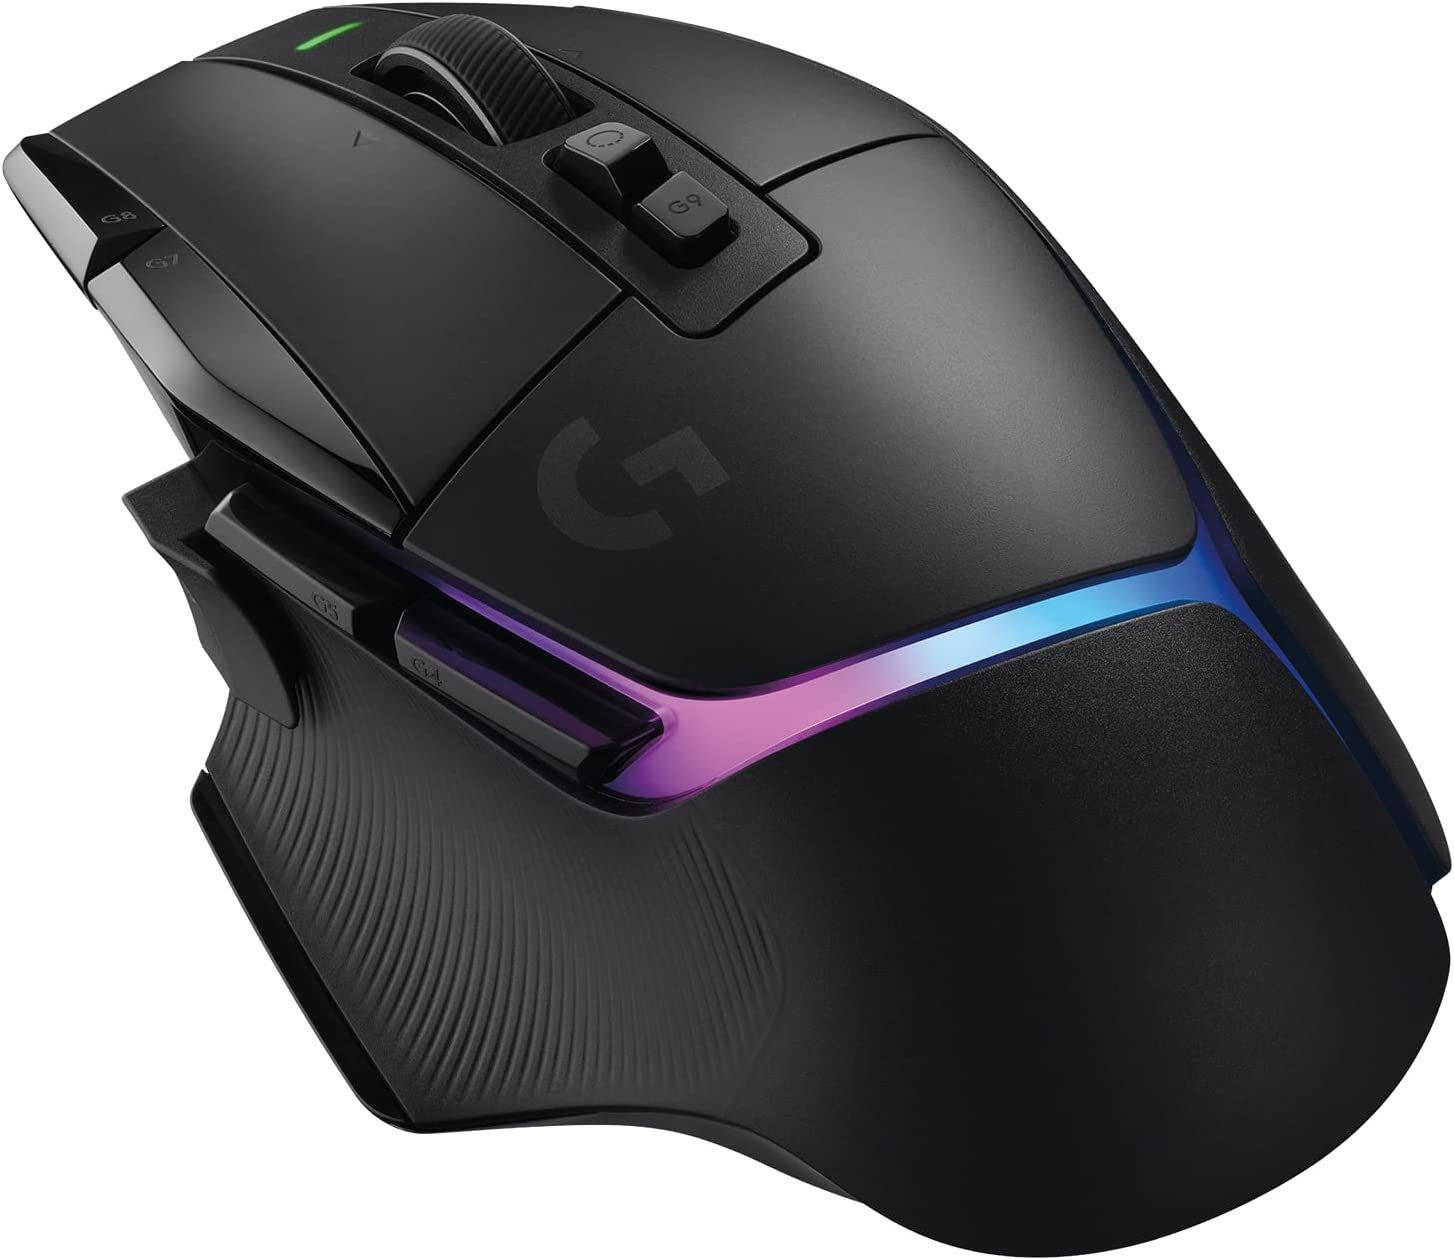 Logitech's PowerPlay delivers no-compromise wireless gaming mice